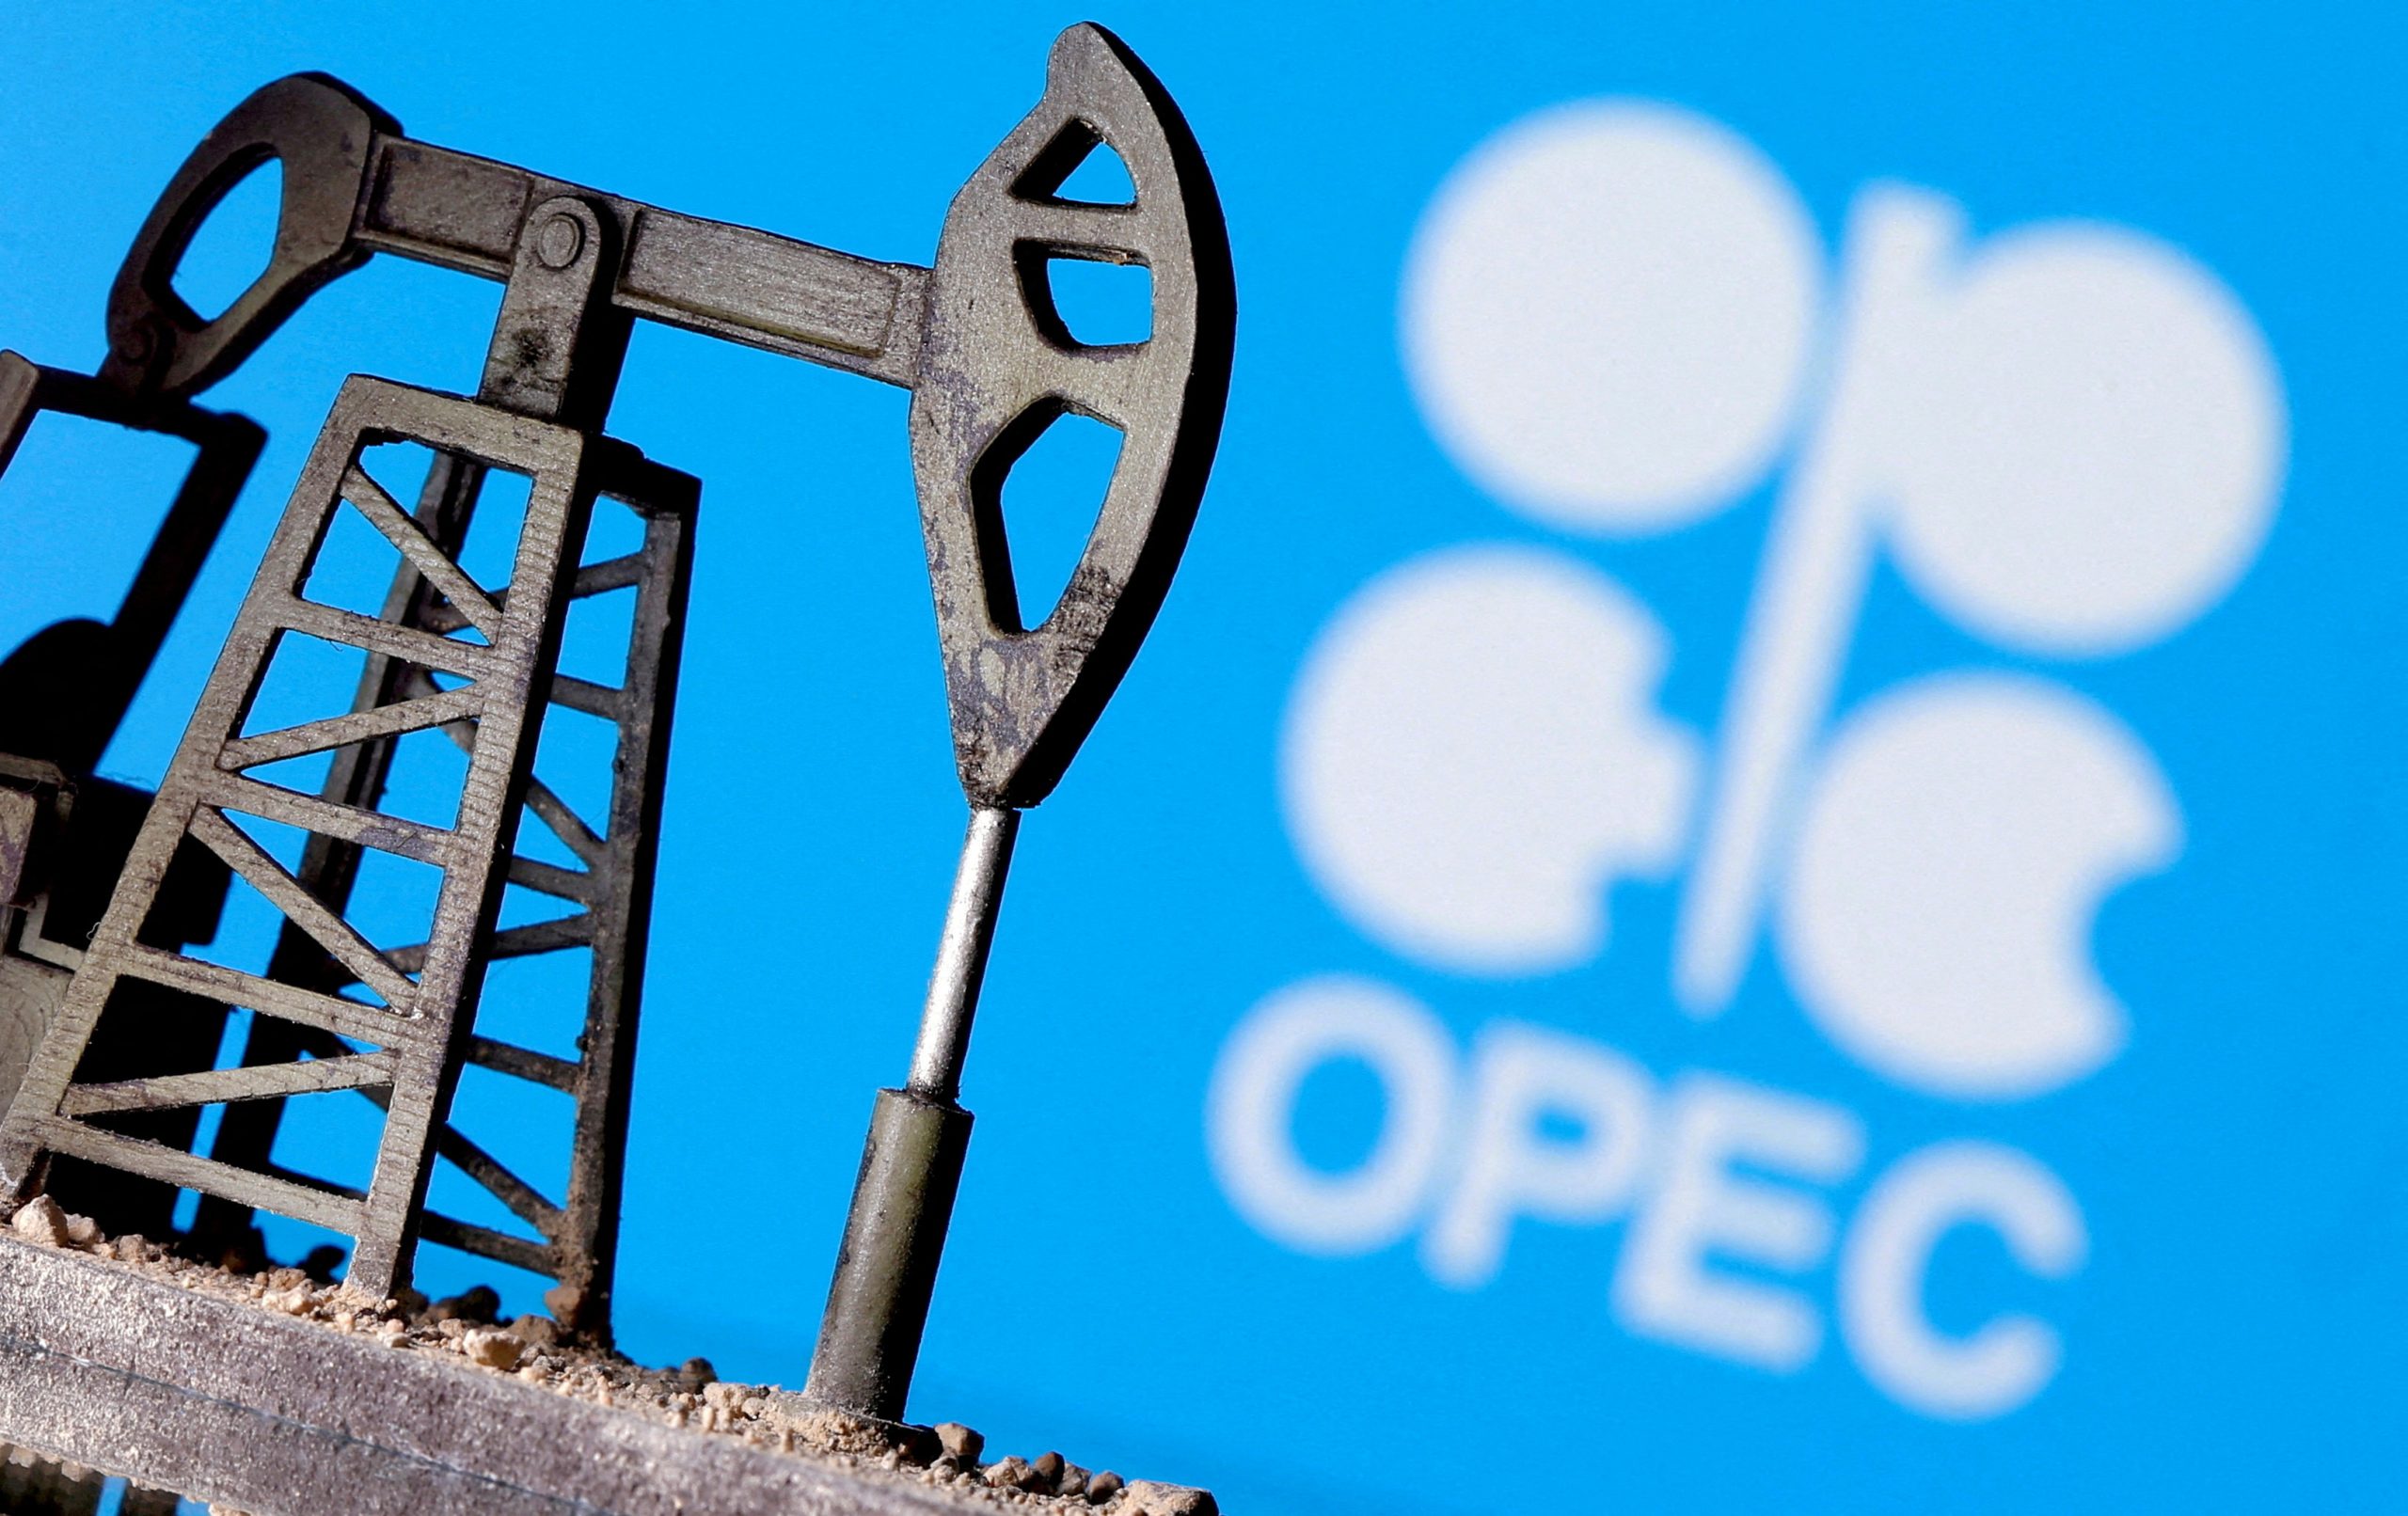 Oil’s rally gathers momentum as Brent pops above $95 a barrel